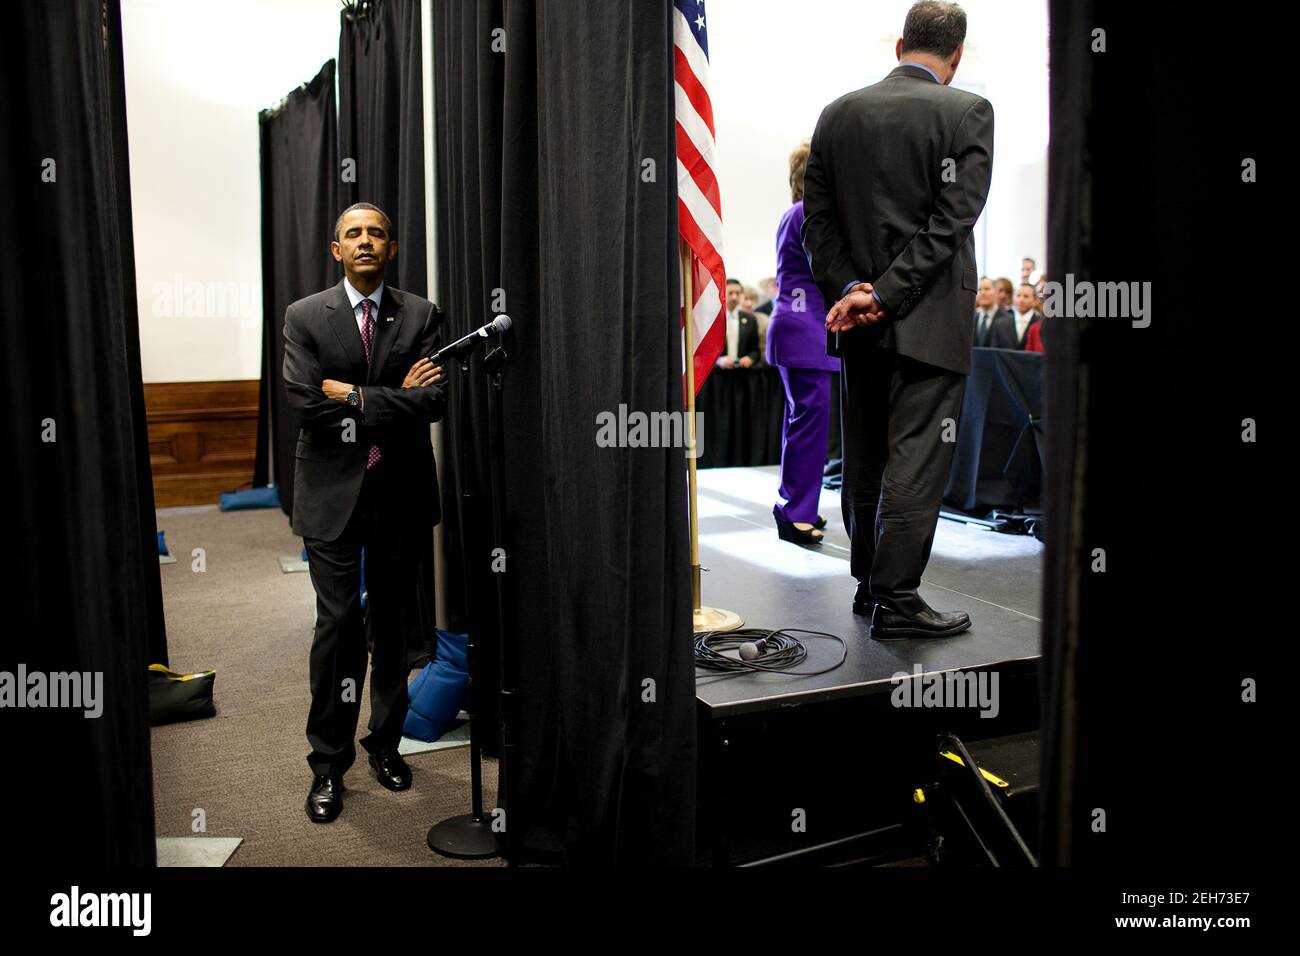 President Barack Obama waits backstage as he is introduced during a  reception for Sen. Barbara Boxer, D-Calif., at the California Science Center in Los Angeles, Calif., April 19, 2010. Former Virginia Gov. Tim Kaine, Democratic National Committee (DNC) Chair, and Sen. Boxer are onstage. Stock Photo